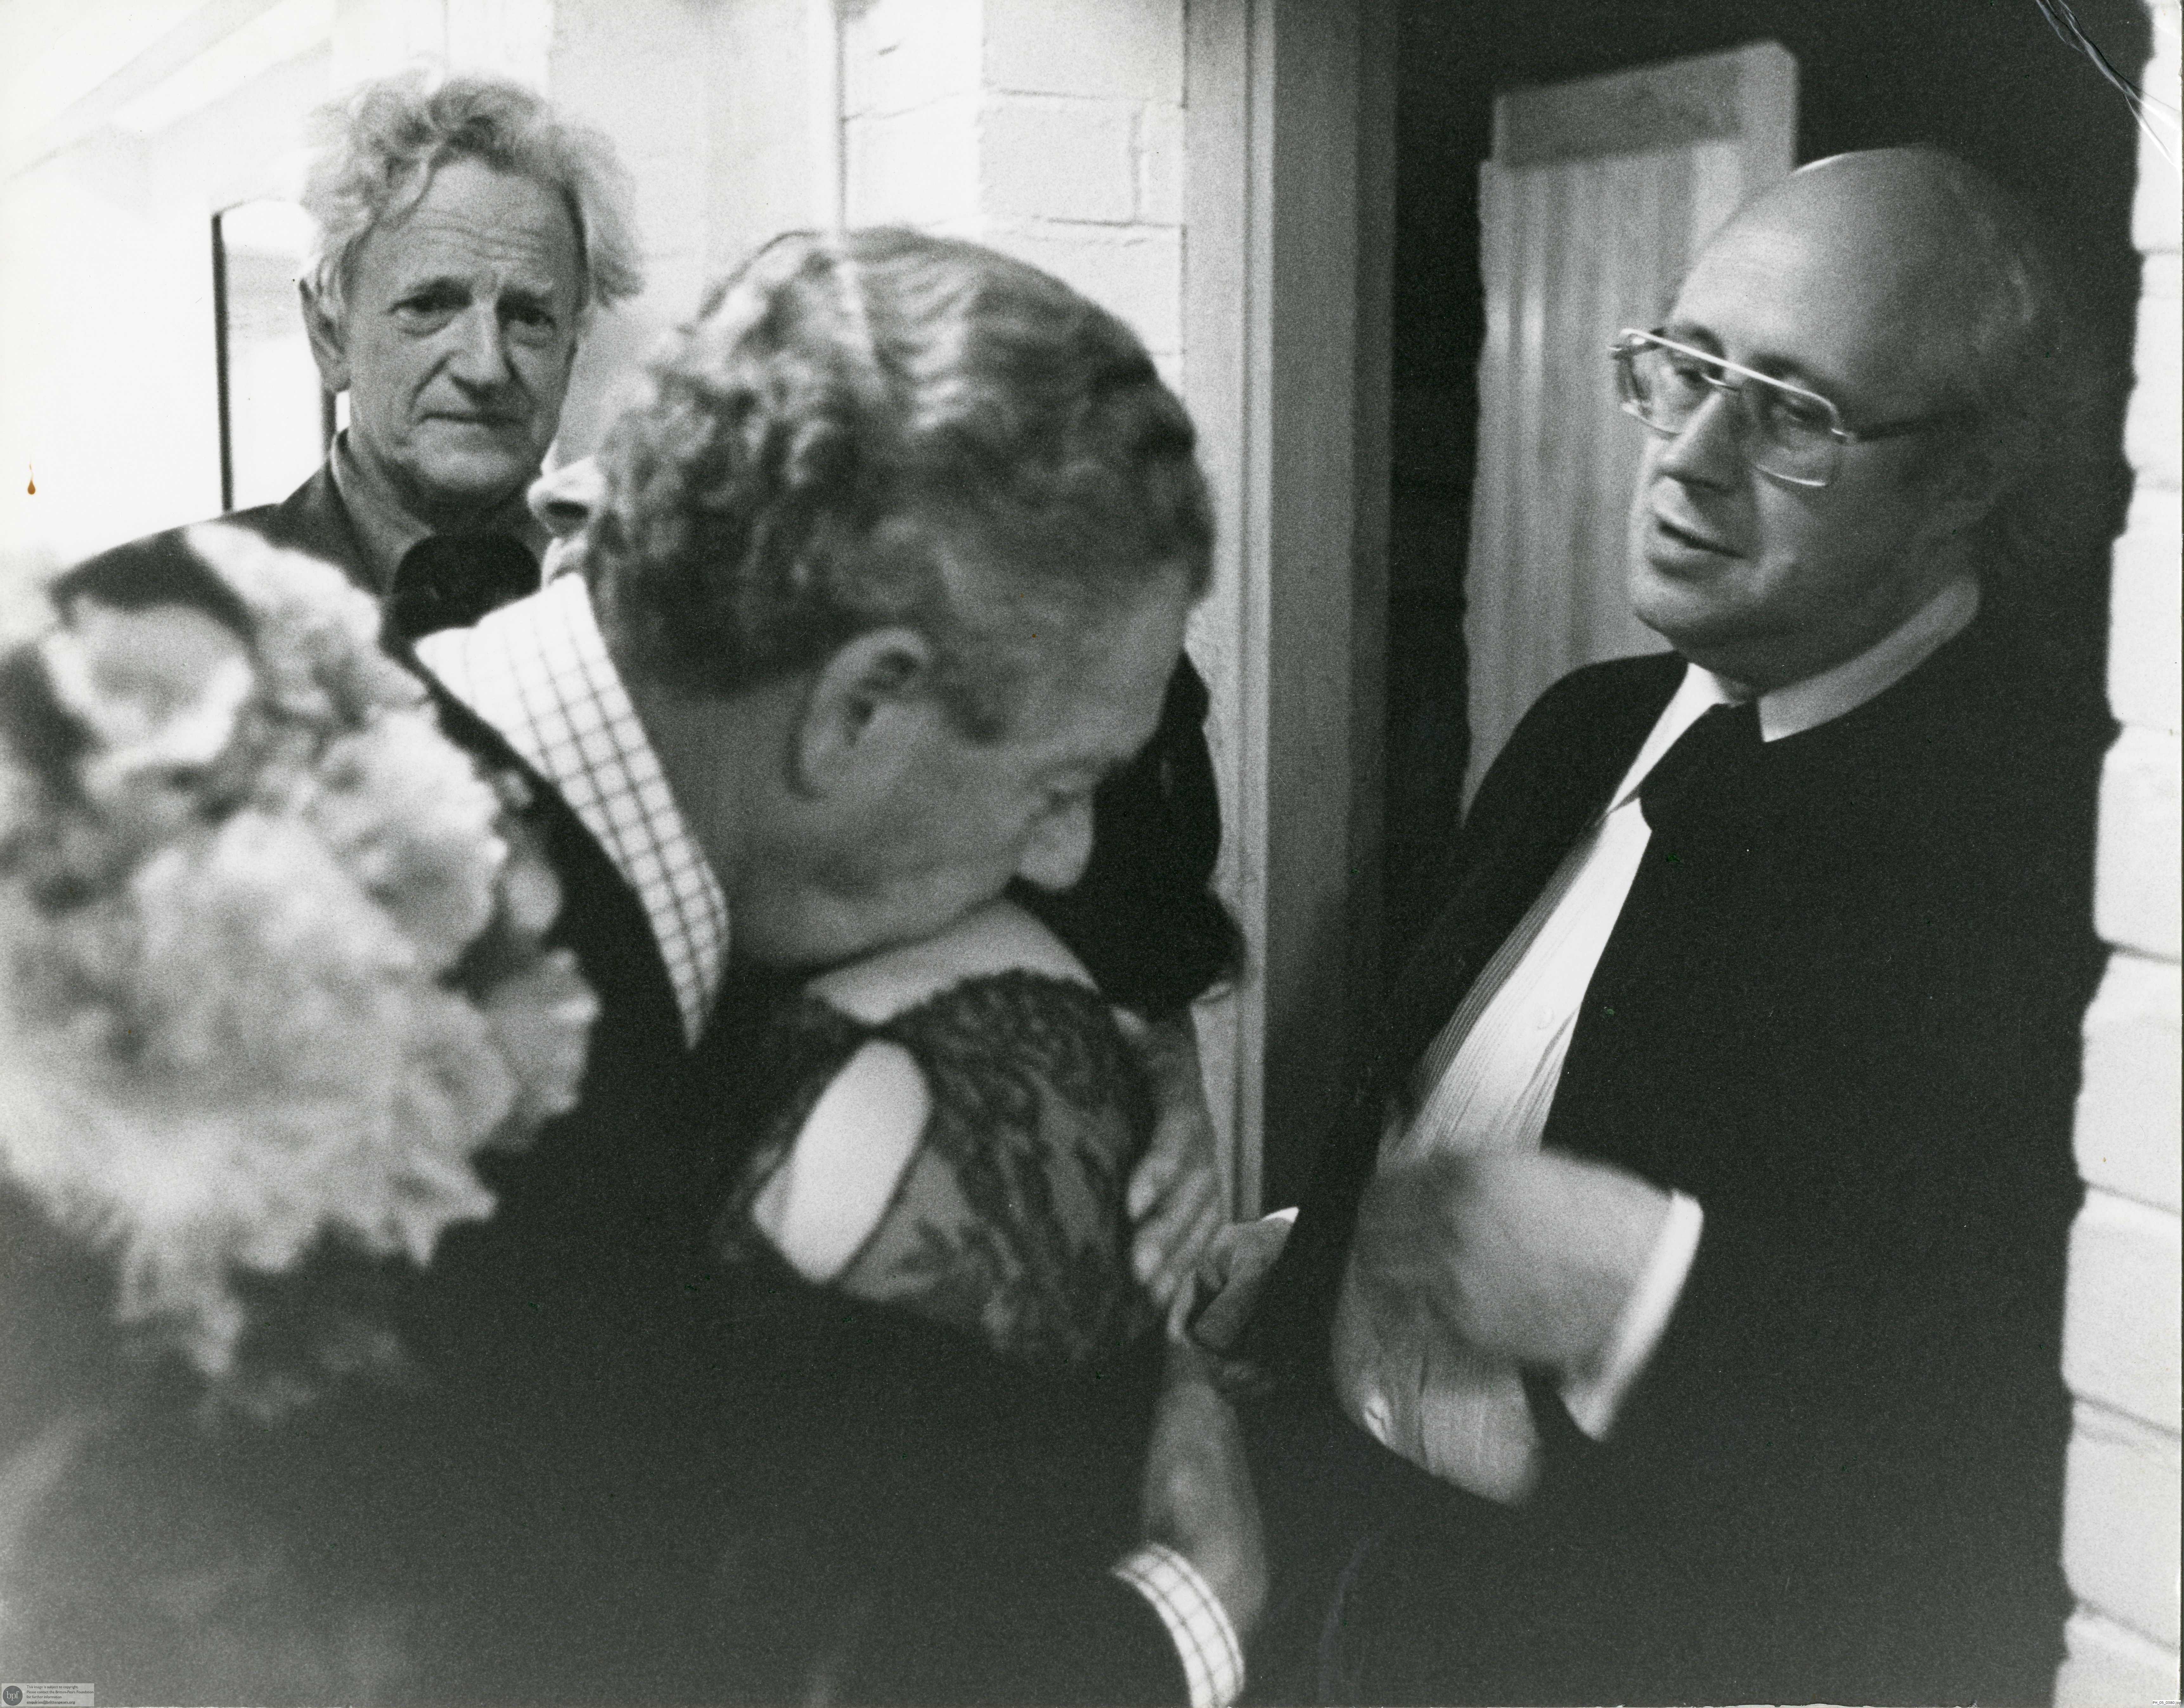 Benjamin Britten and Peter Pears backstage with Rostropovich and Vishnevskaya